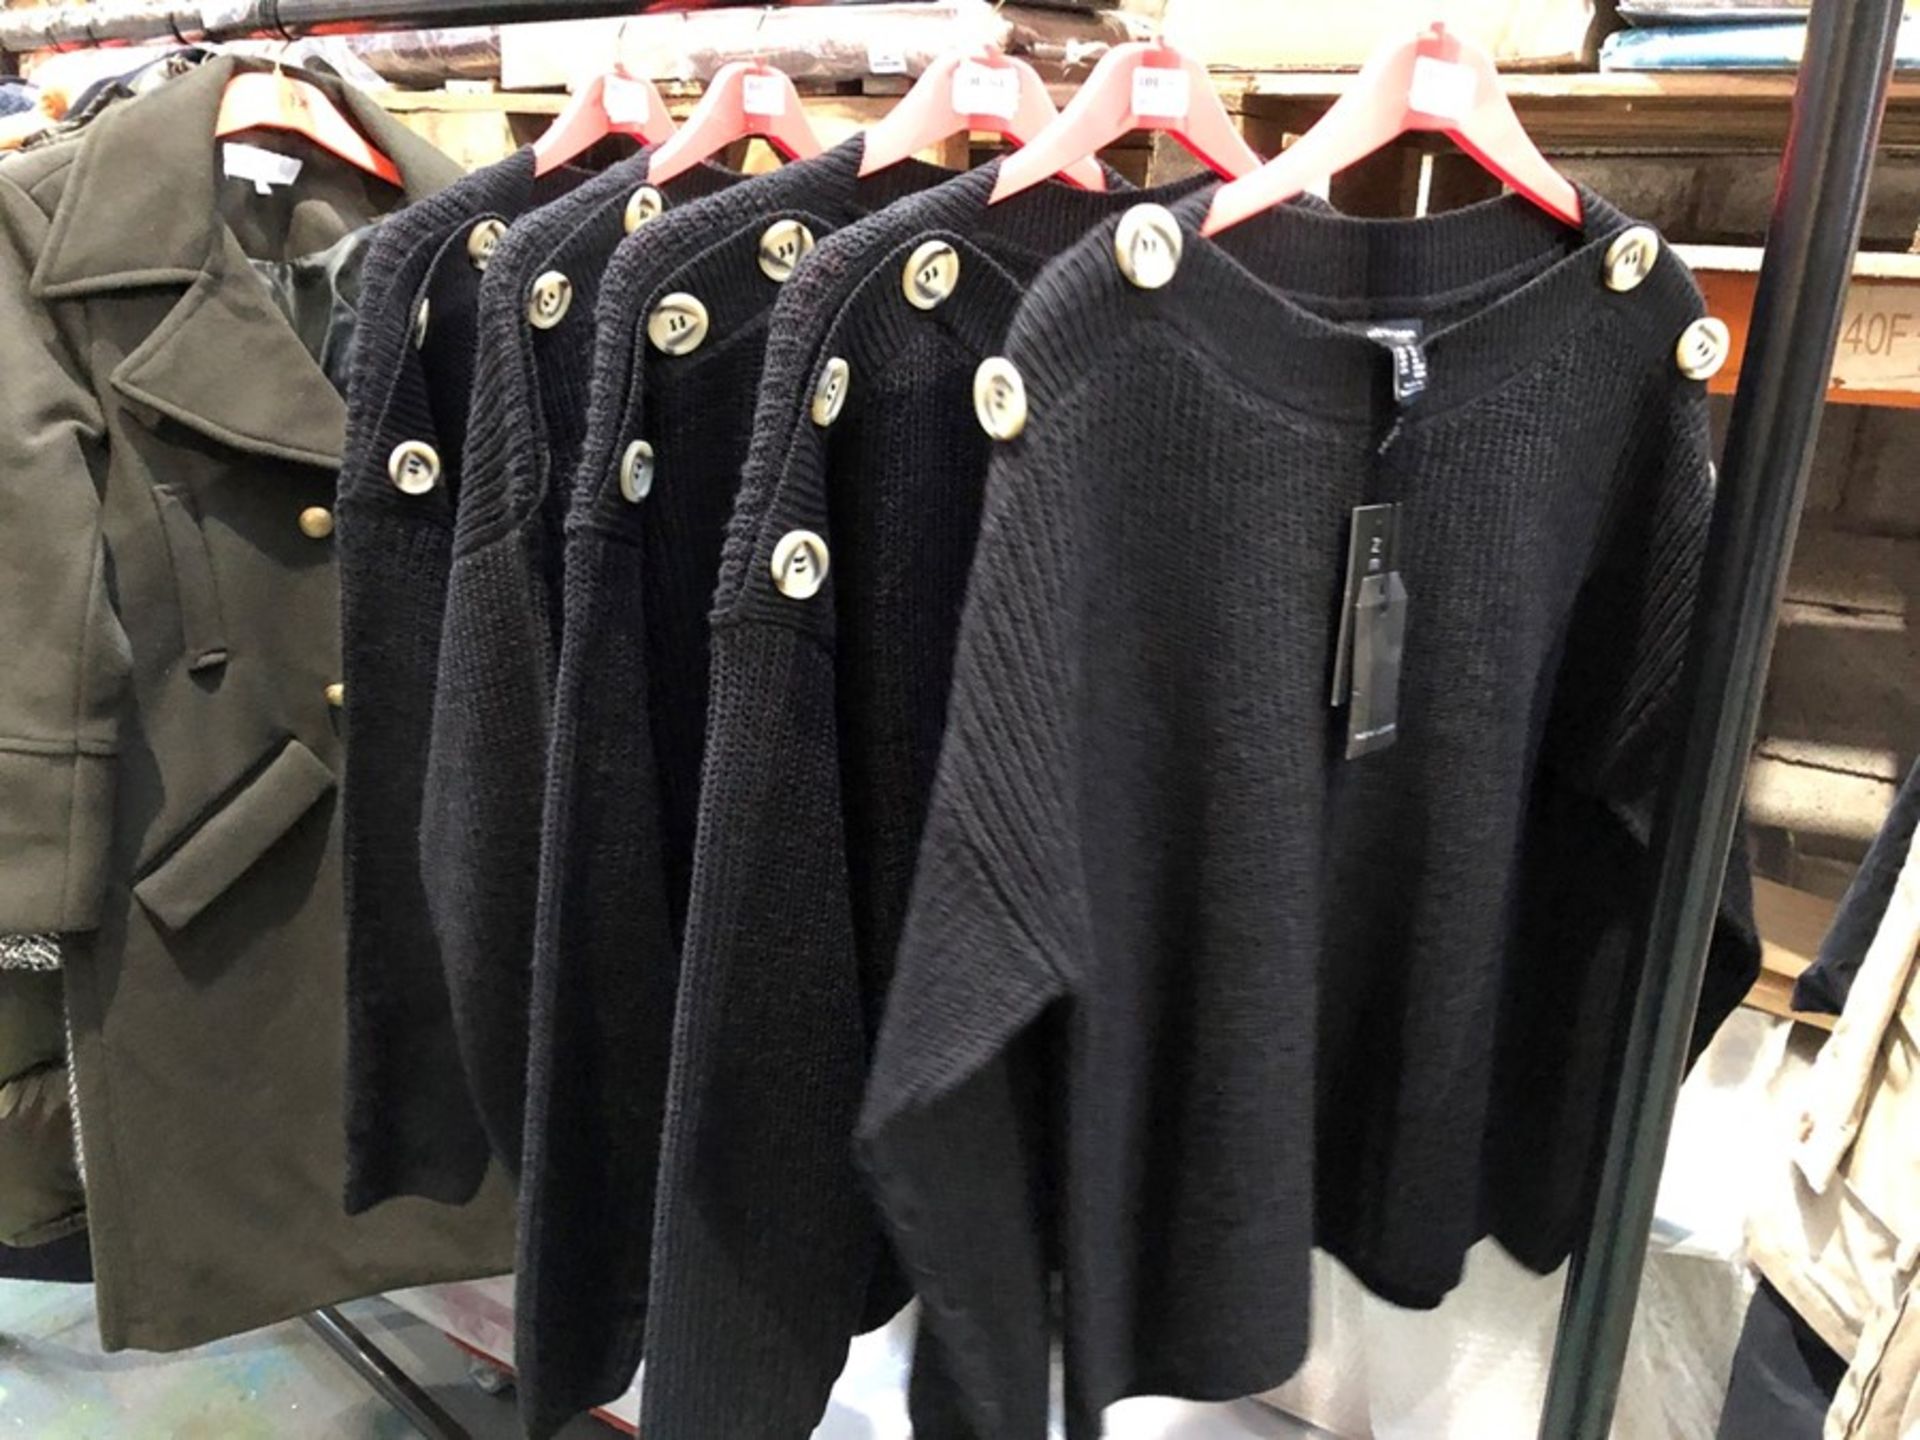 1 LOT TO CONTAIN 5 ' NEW LOOK ' BLACK BUTTONED JUMPERS / UK SIZES LEFT TO RIGHT M,M,M,M,M (PUBLIC